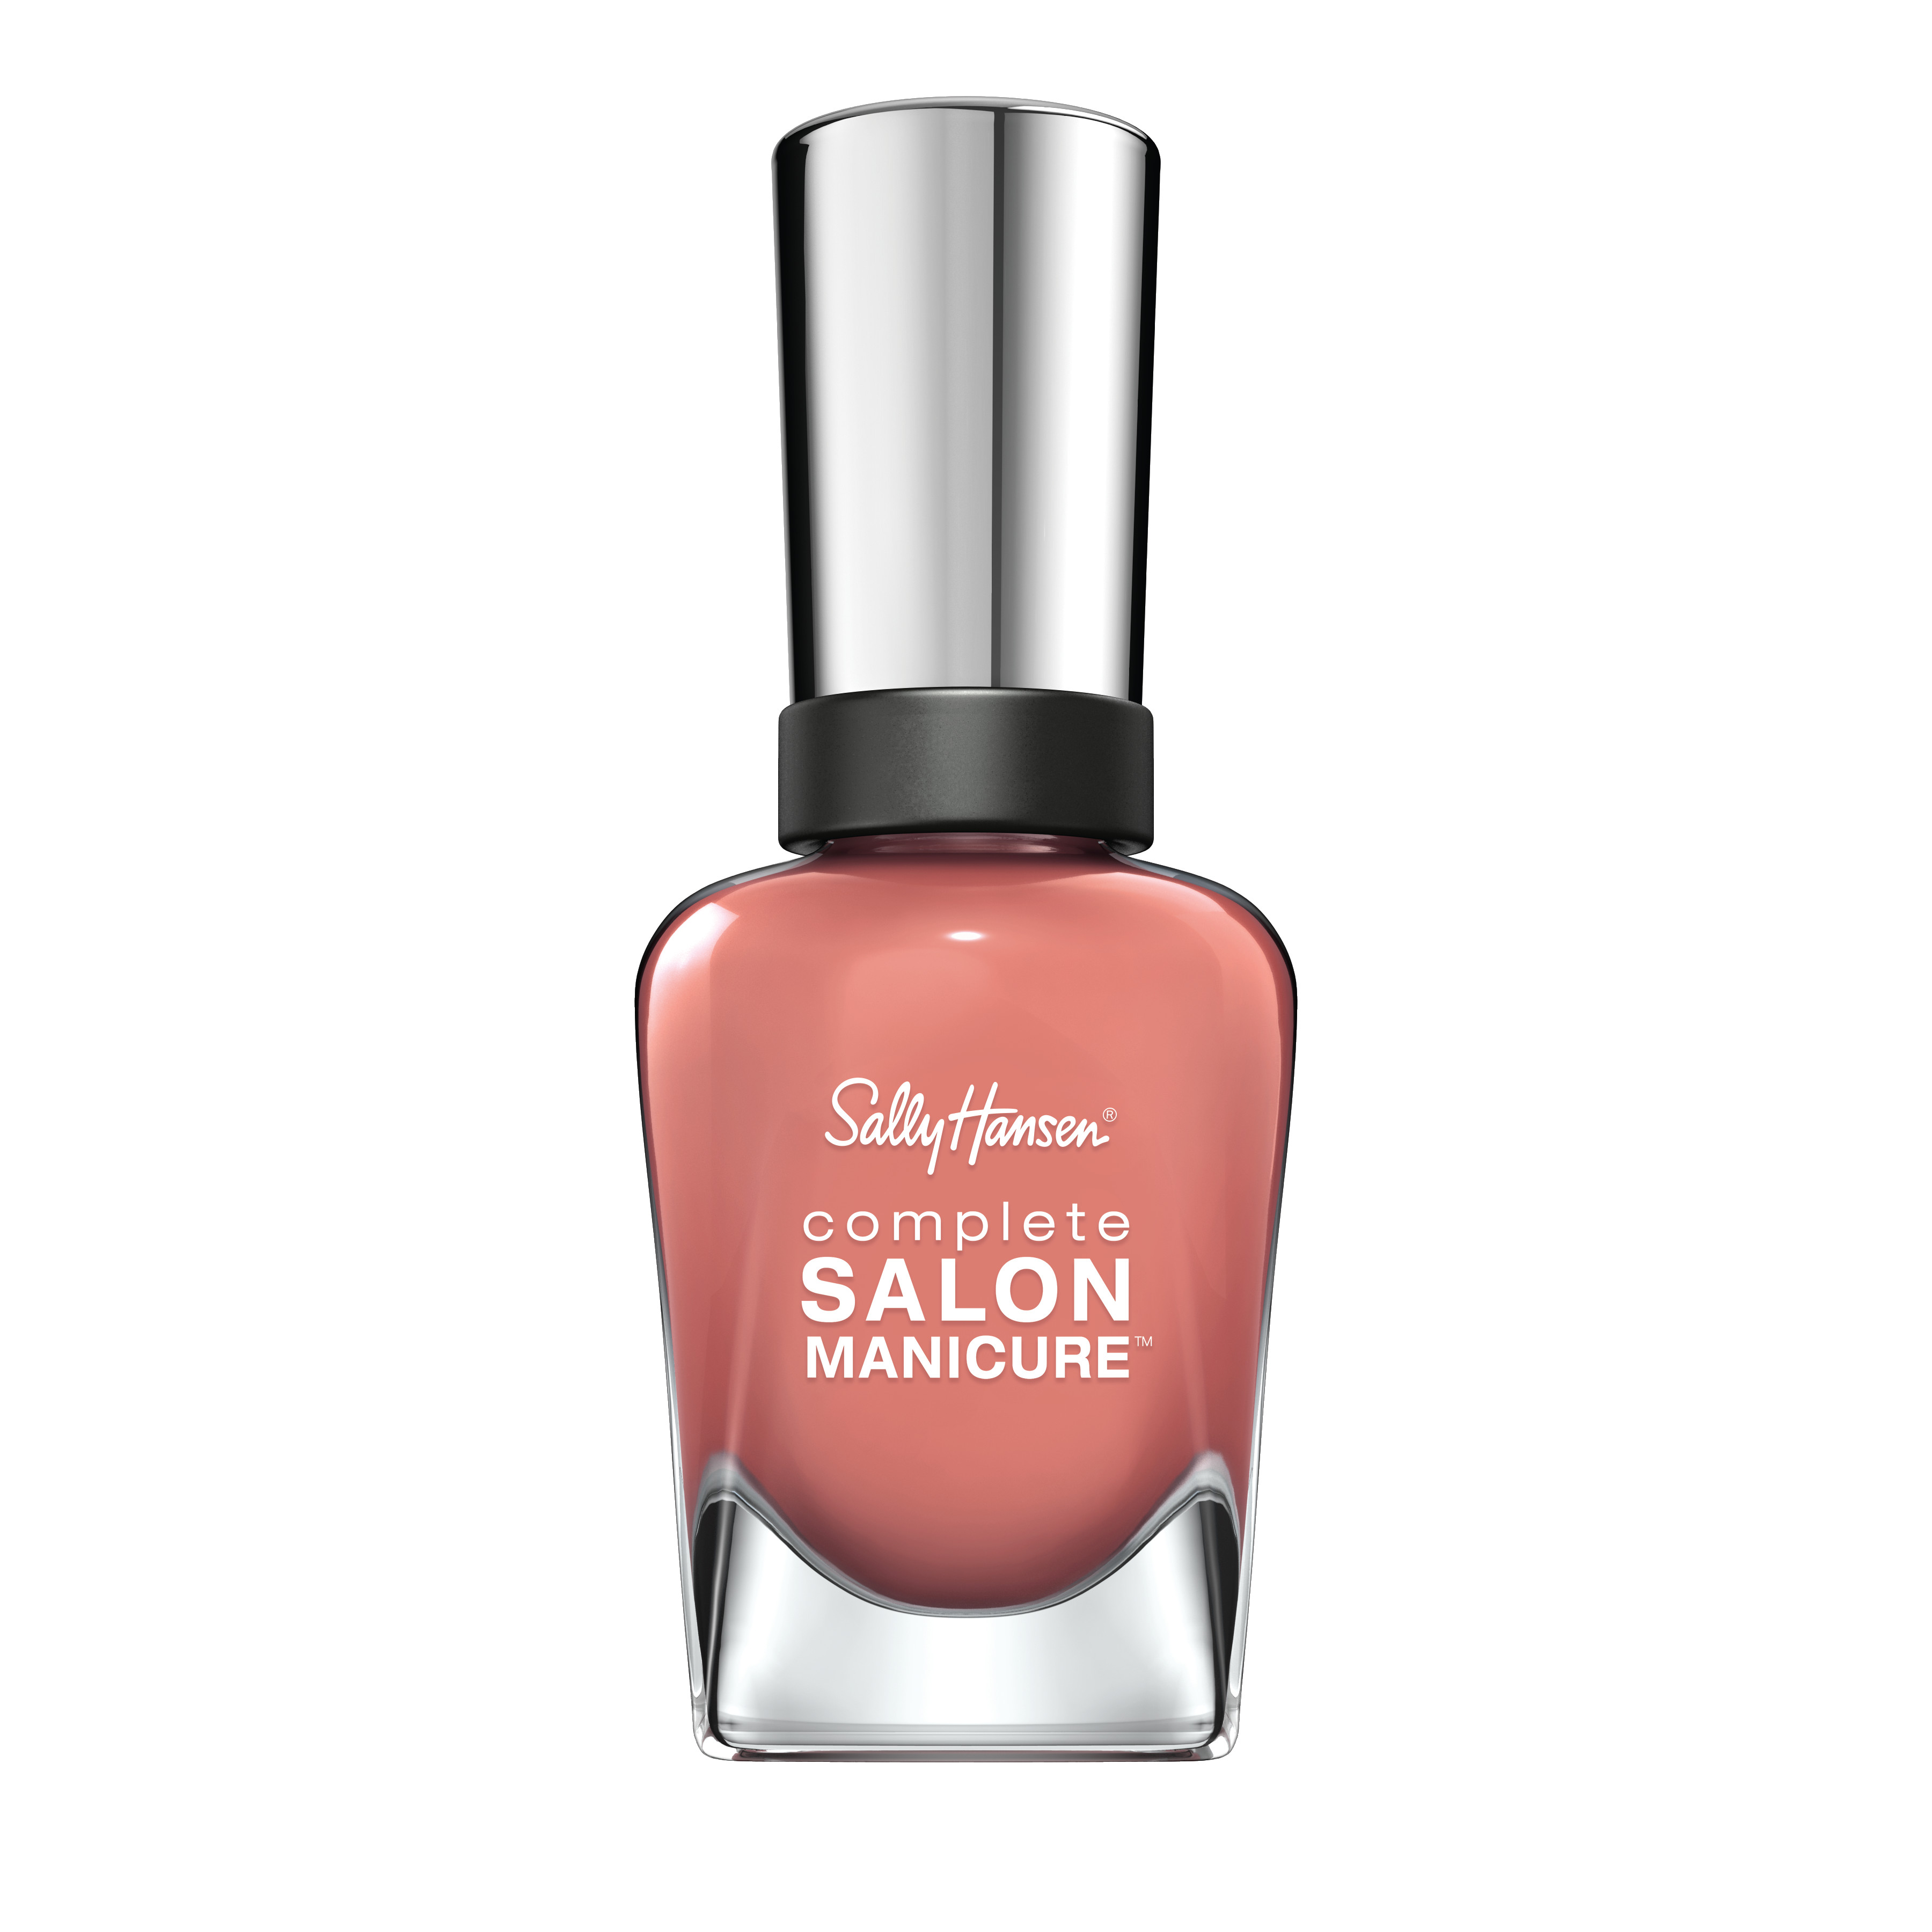 Sally Hansen Complete Salon Manicure Nail Color, So Much Fawn - image 1 of 3